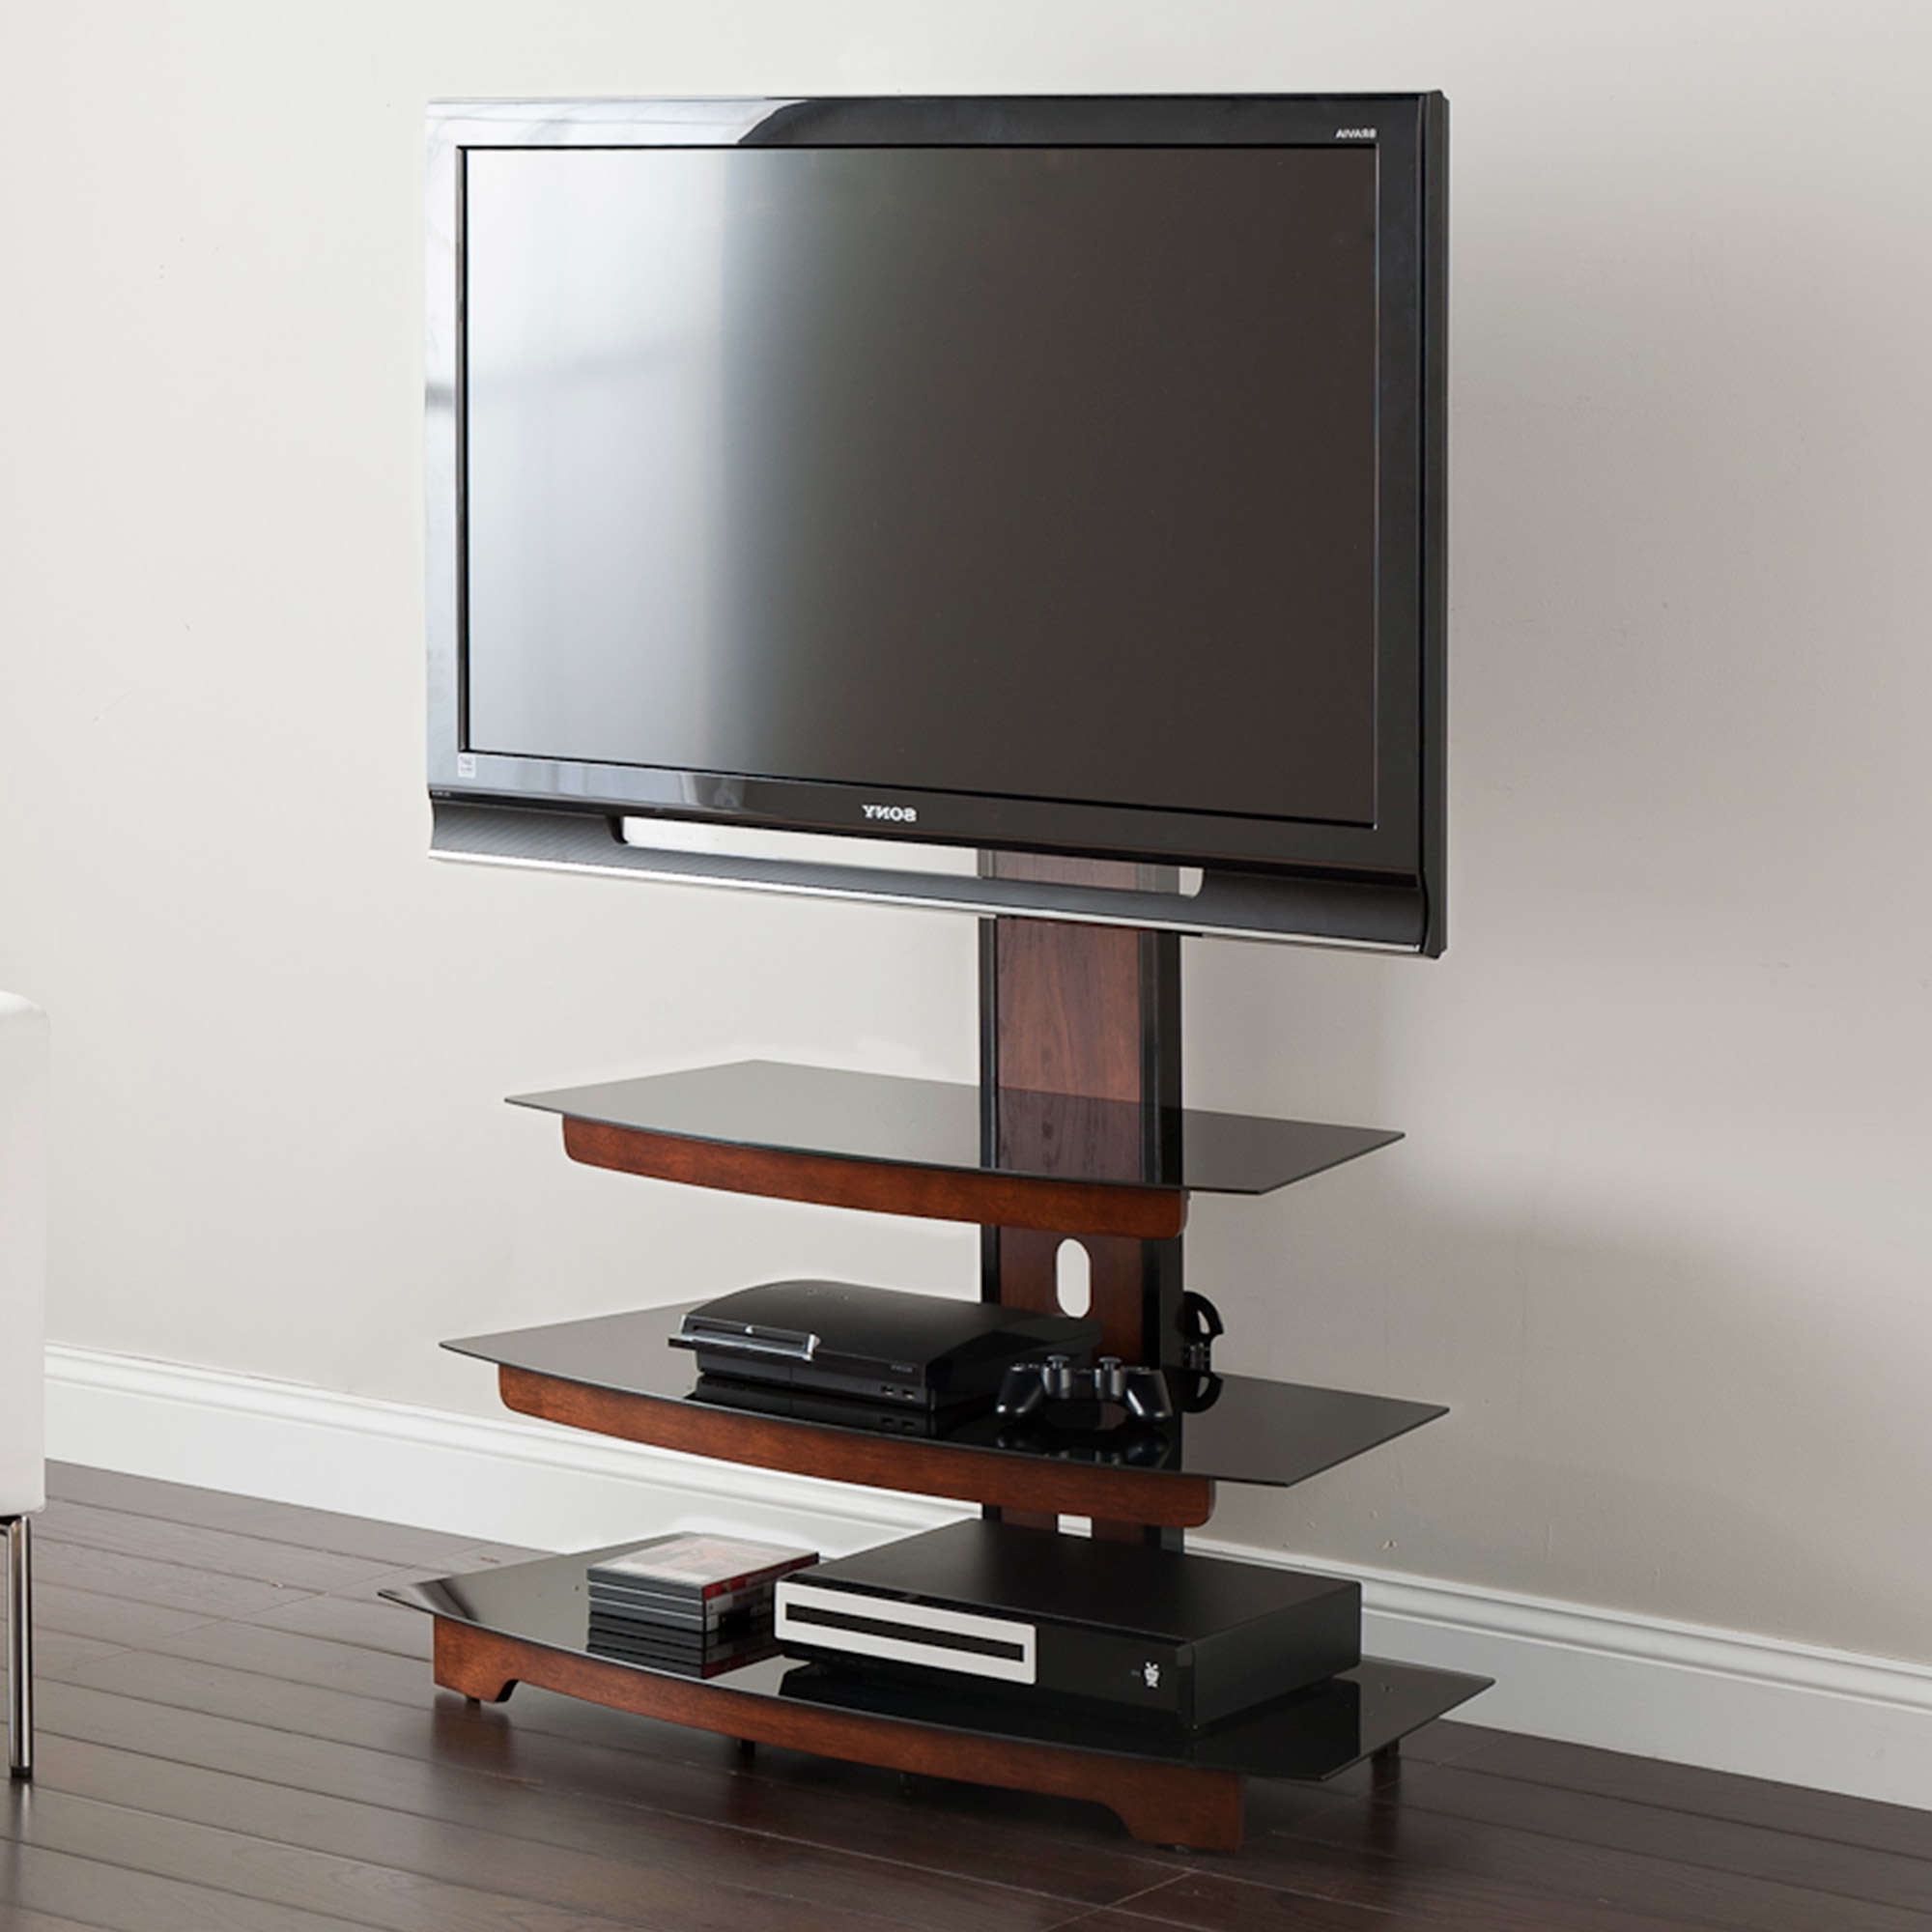 Whalen 3 Tier Television Stand For Tvs Up To 50", Perfect For Flat Screens,  Black Metal With Wood Trim Accent – Walmart With Regard To Tier Stands For Tvs (View 7 of 20)